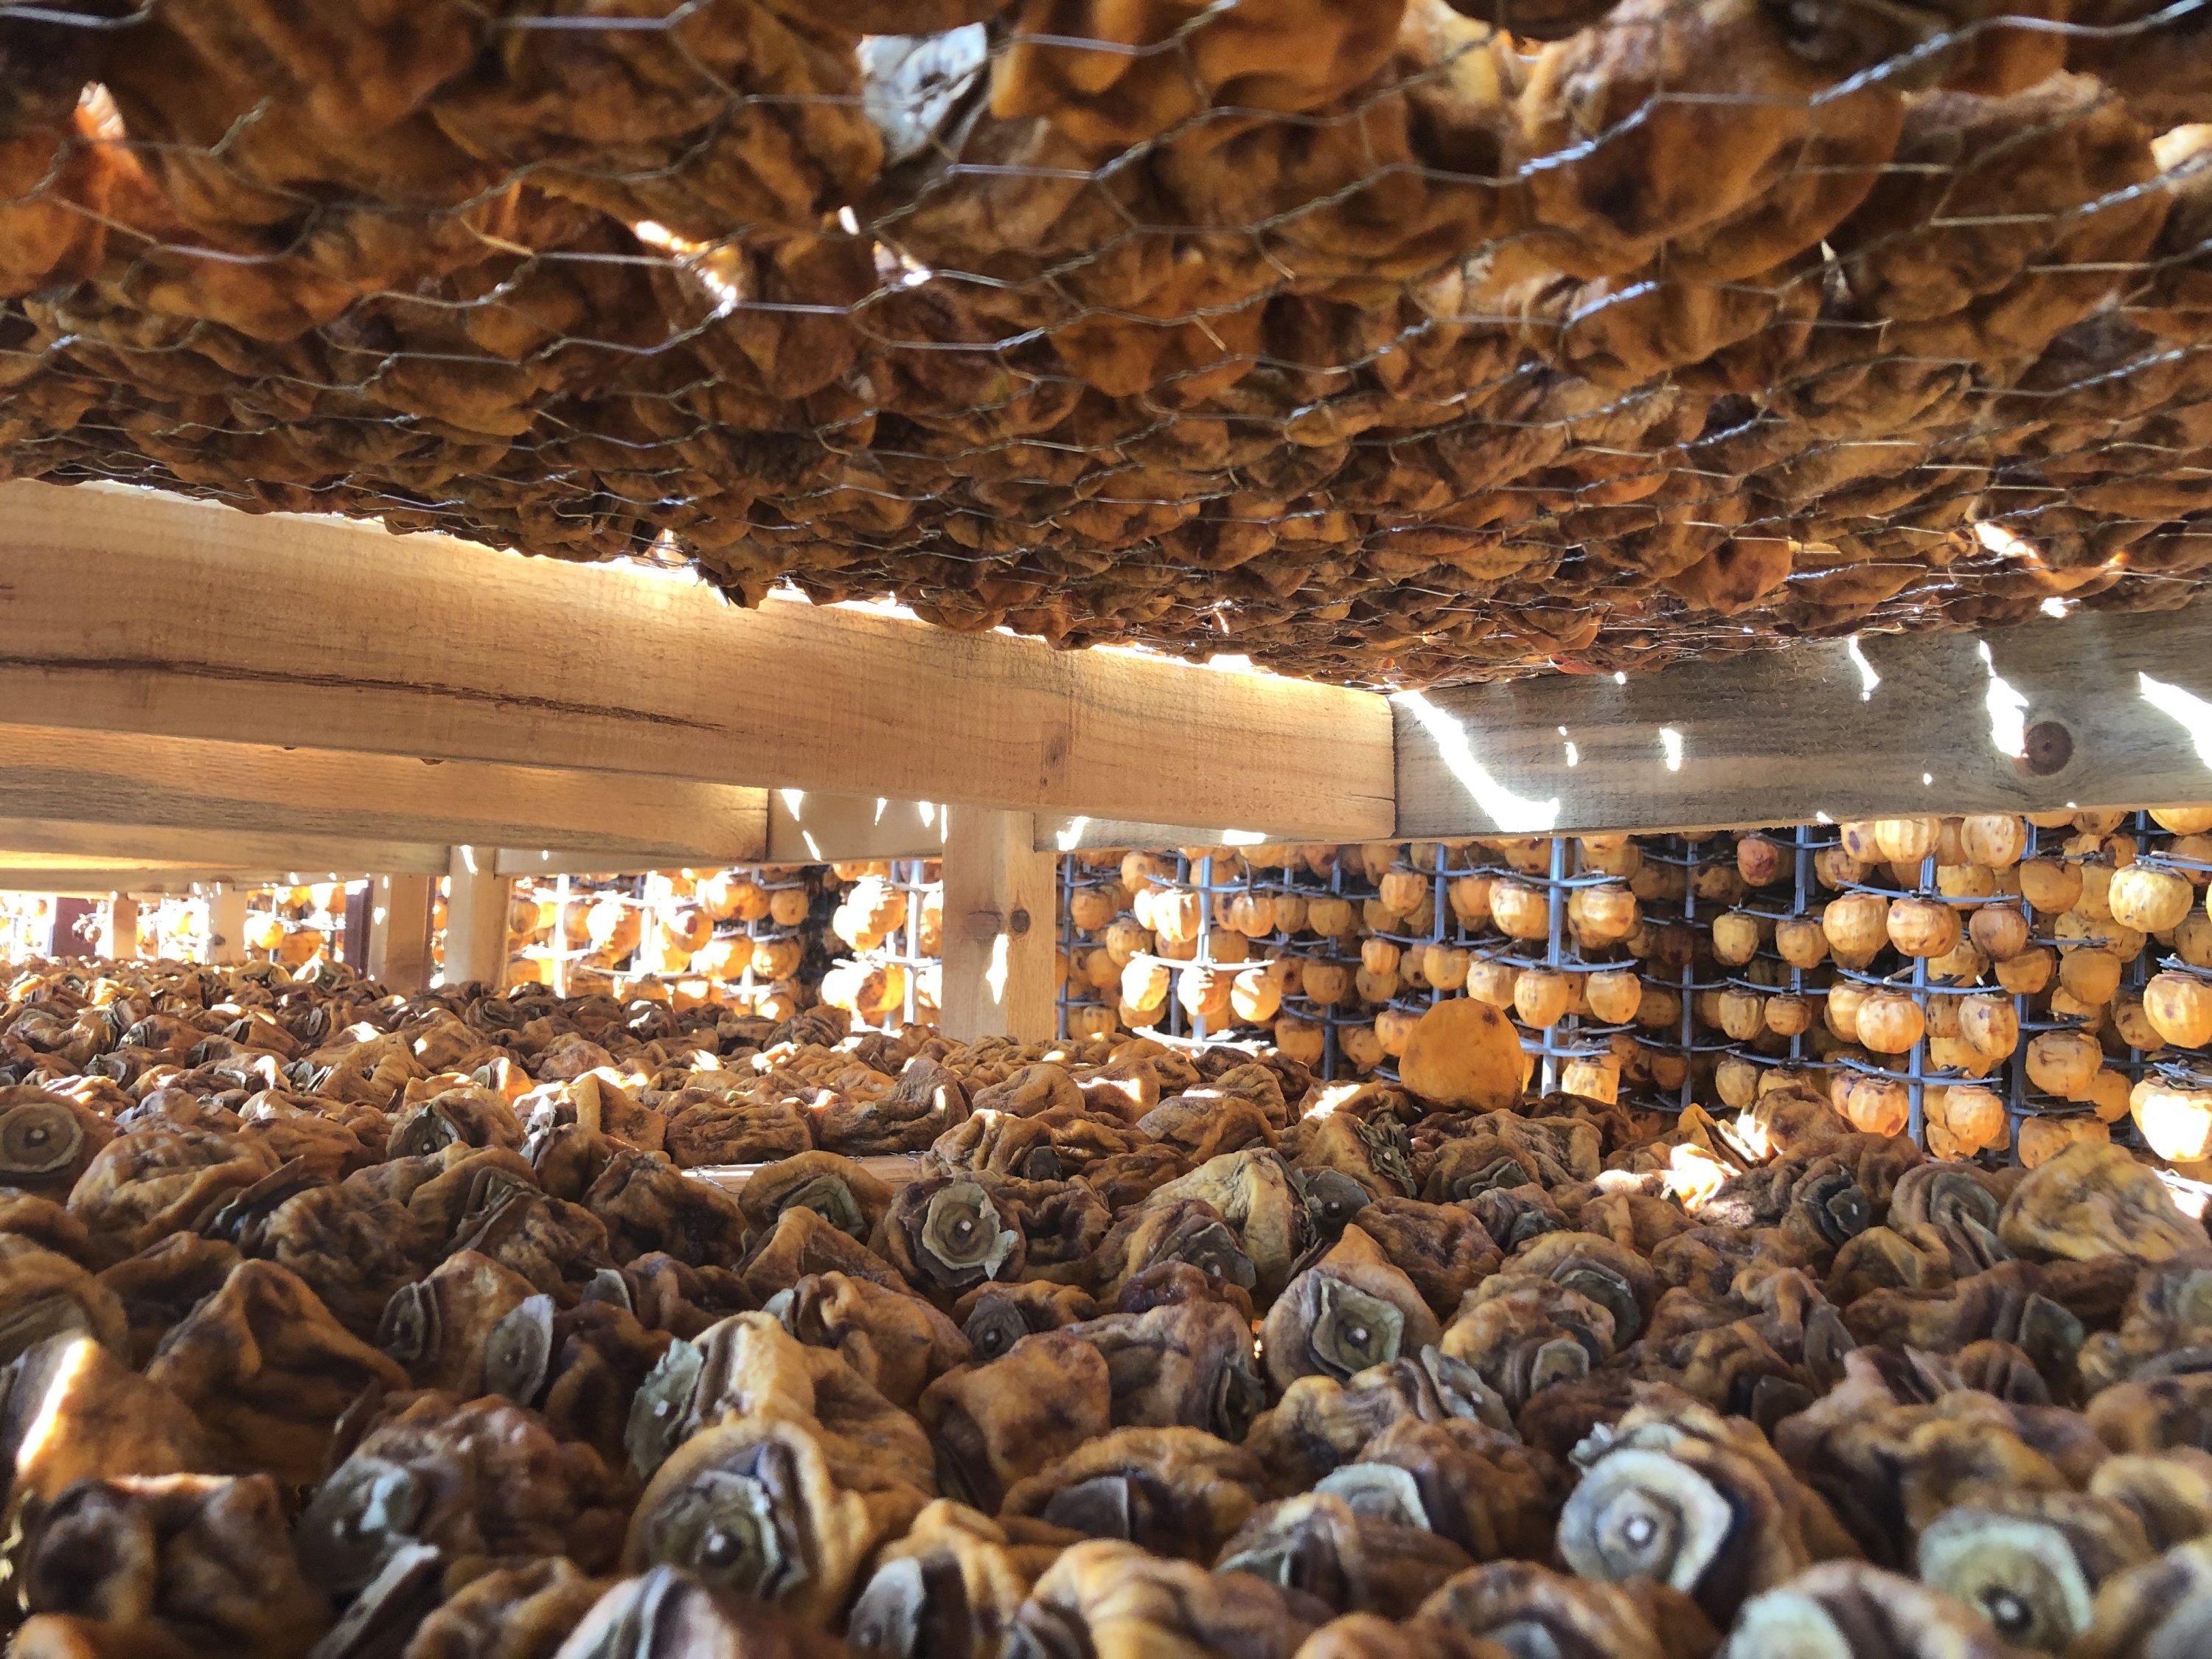 Mediterranean persimmons are threaded in rows and left to air dry on special racks in Adana, southern Turkey, Dec. 10, 2020. (IHA Photo)